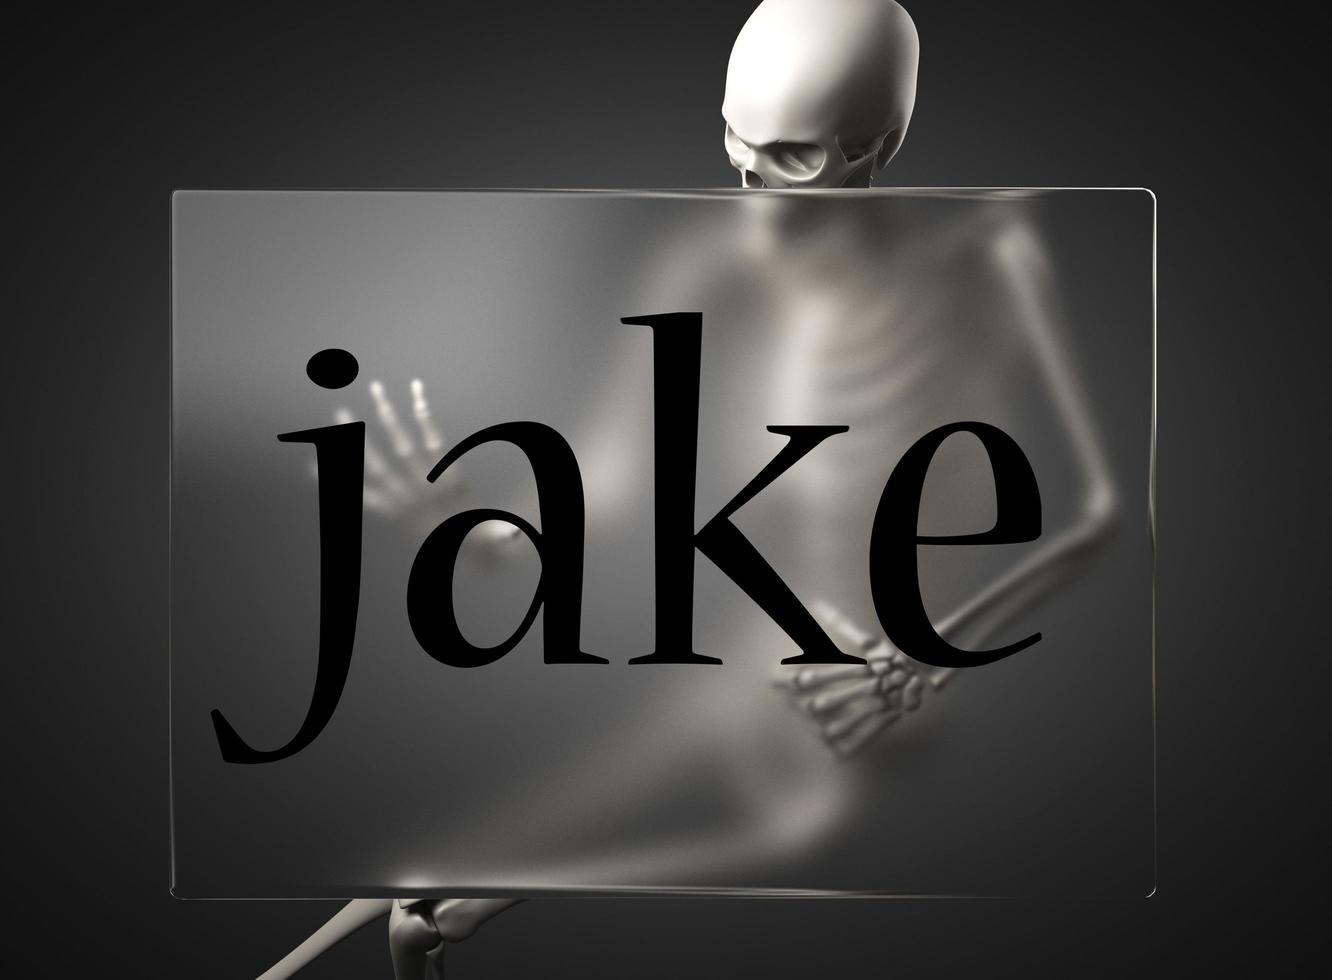 jake word on glass and skeleton photo